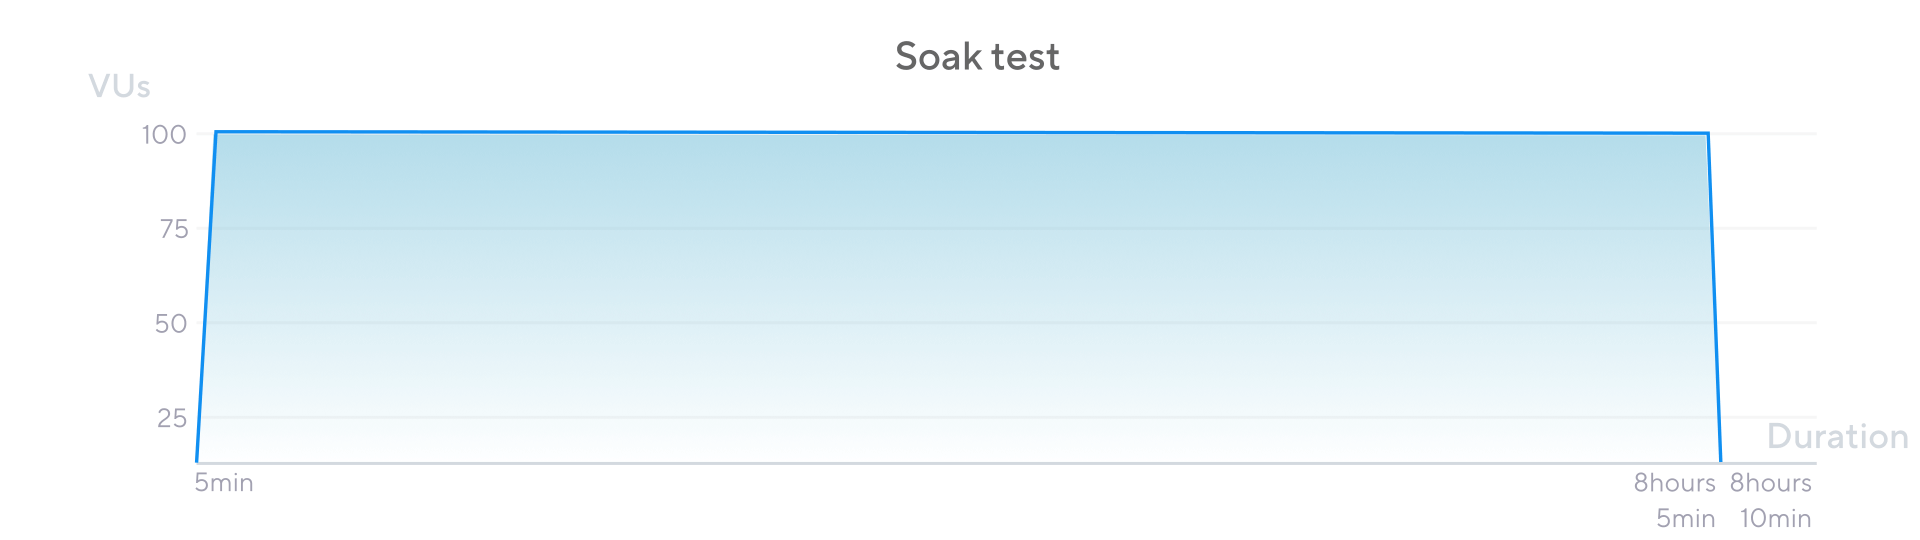 Soak test chart for an 8-hour duration in Grafana k6.